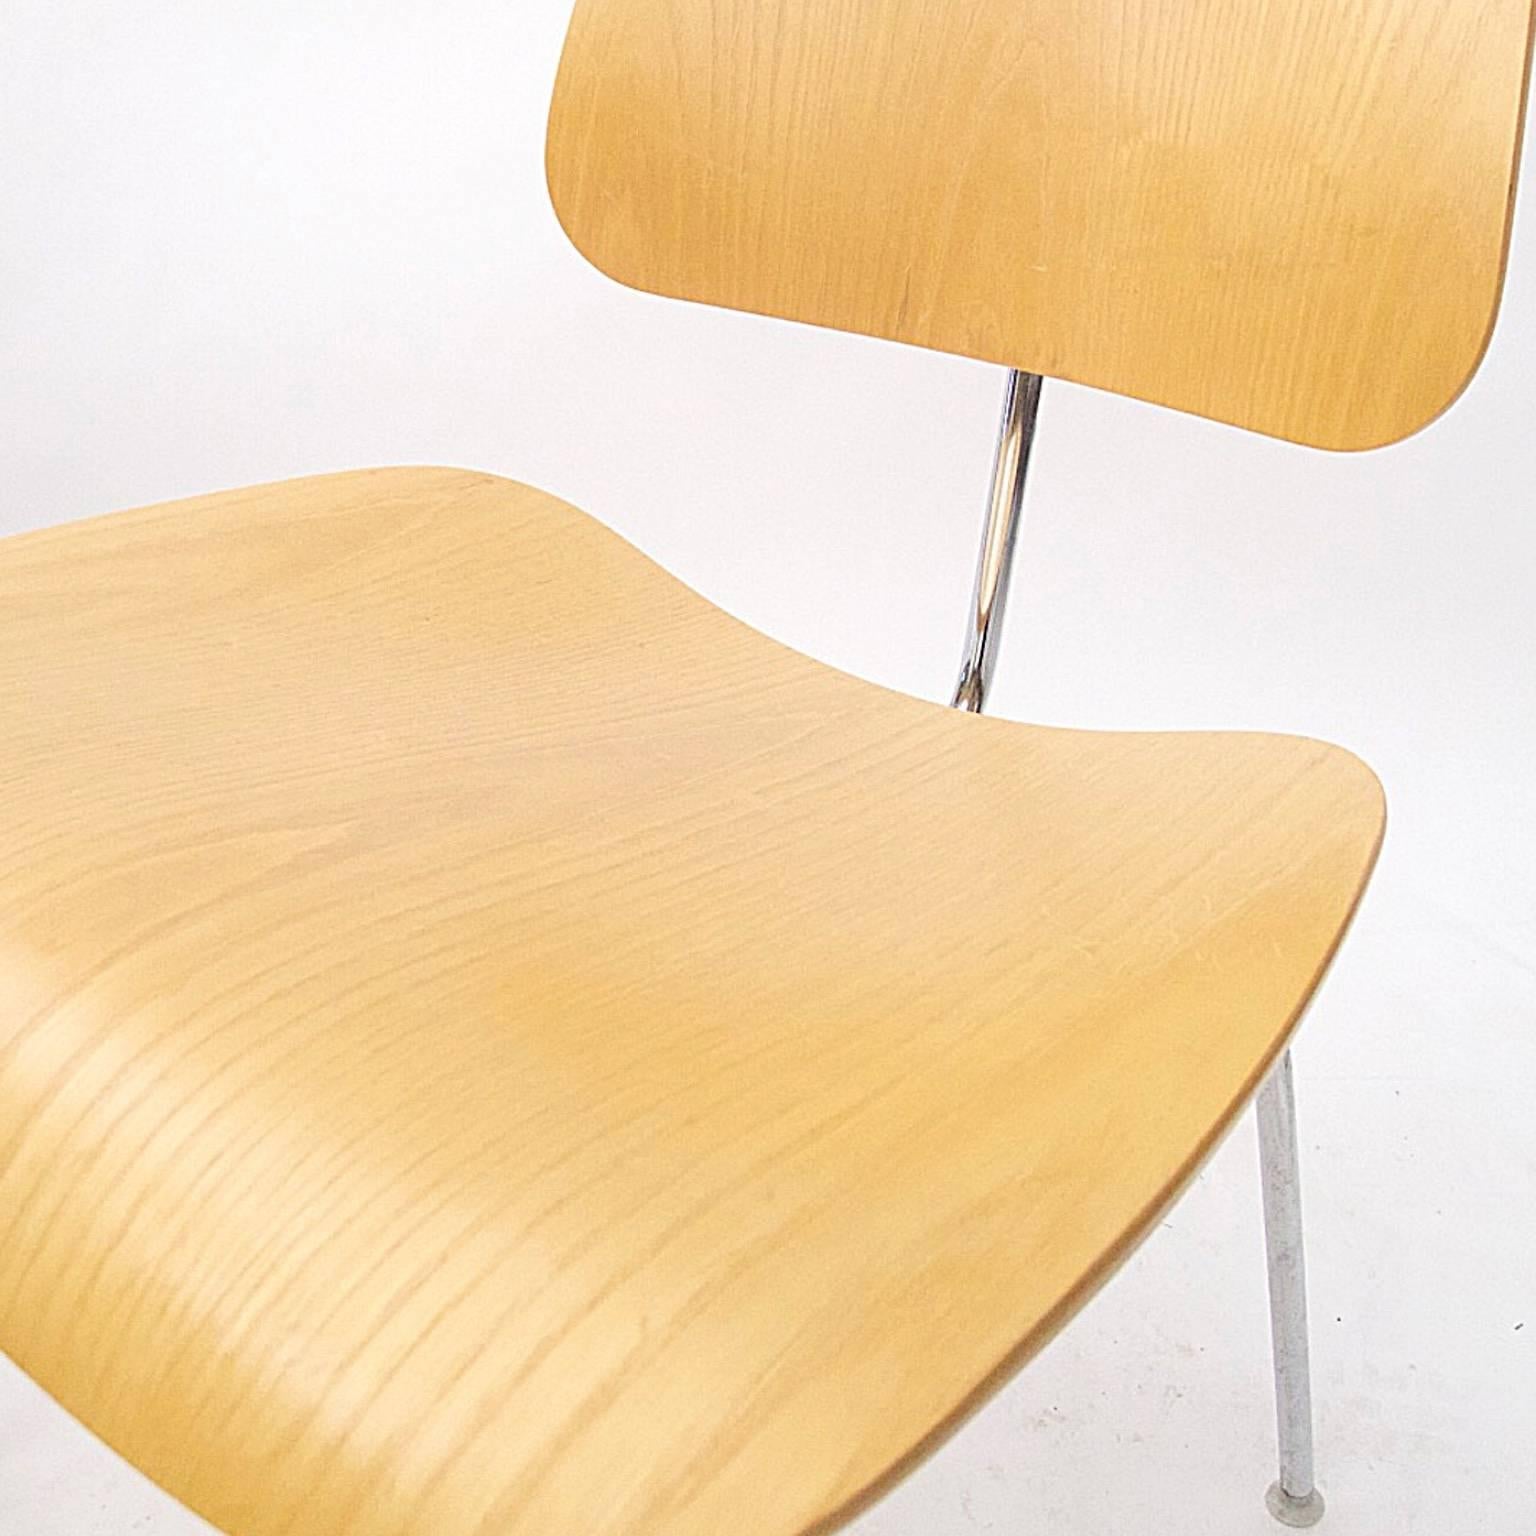 Eames DCM chairs in white ash. These superbly designed chairs have remained in production since 1949 with minor changes to the glides. All chairs are labeled and in good pre-owned condition. Some wear and surface scraping commensurate with average